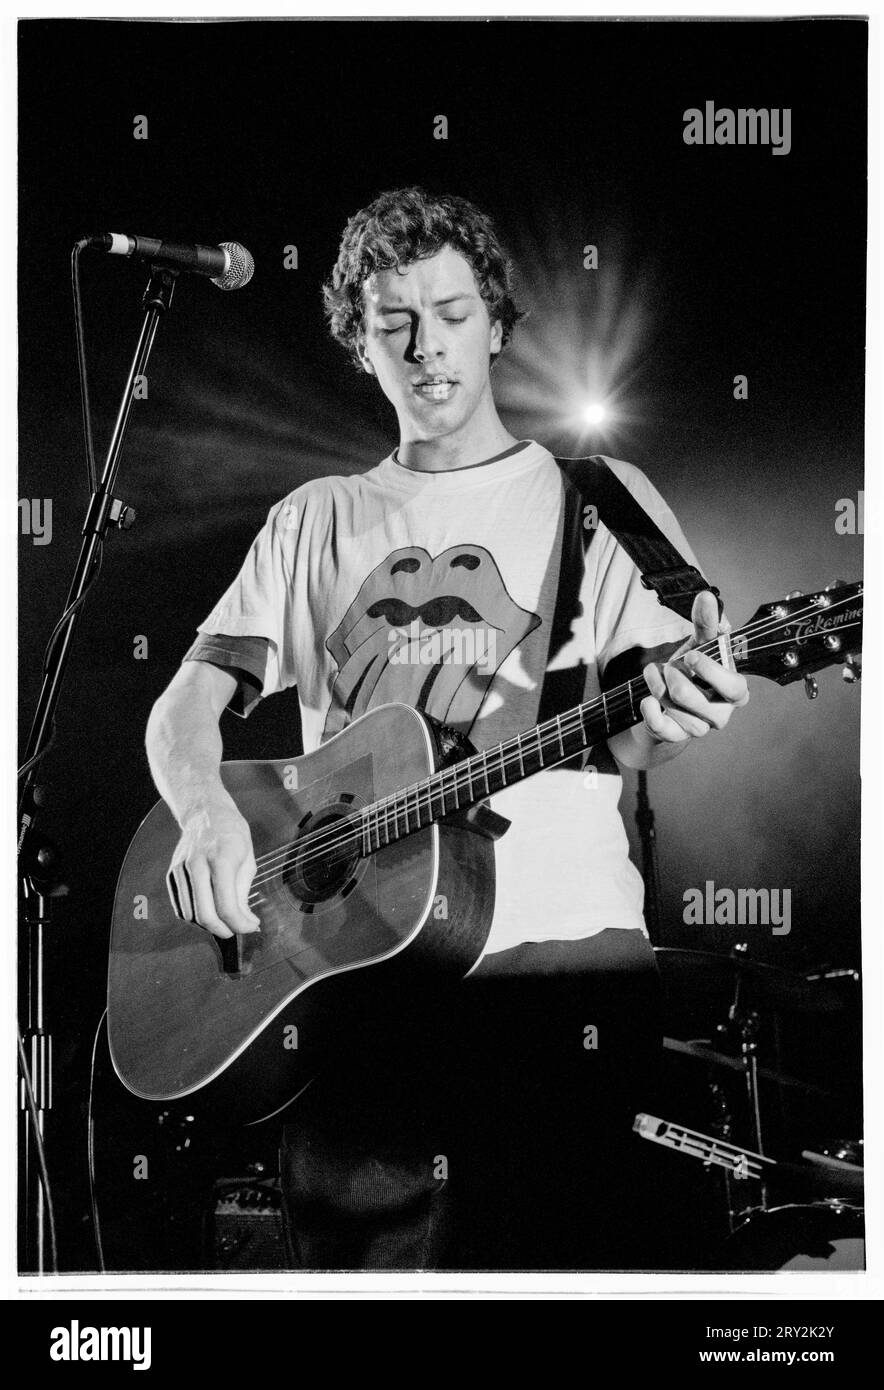 COLDPLAY, CHRIS MARTIN, JAN 2000: A very young Chris Martin of rock band Coldplay. The band were playing as the opening act on the four band  UK NME Tour at Cardiff University Great Hall in Cardiff, Wales, UK on 25 January, 2000. This iconic image was the first image of the band to appear full page in Rolling Stone magazine in their breakthrough year 2000. Photograph: Rob Watkins Stock Photo